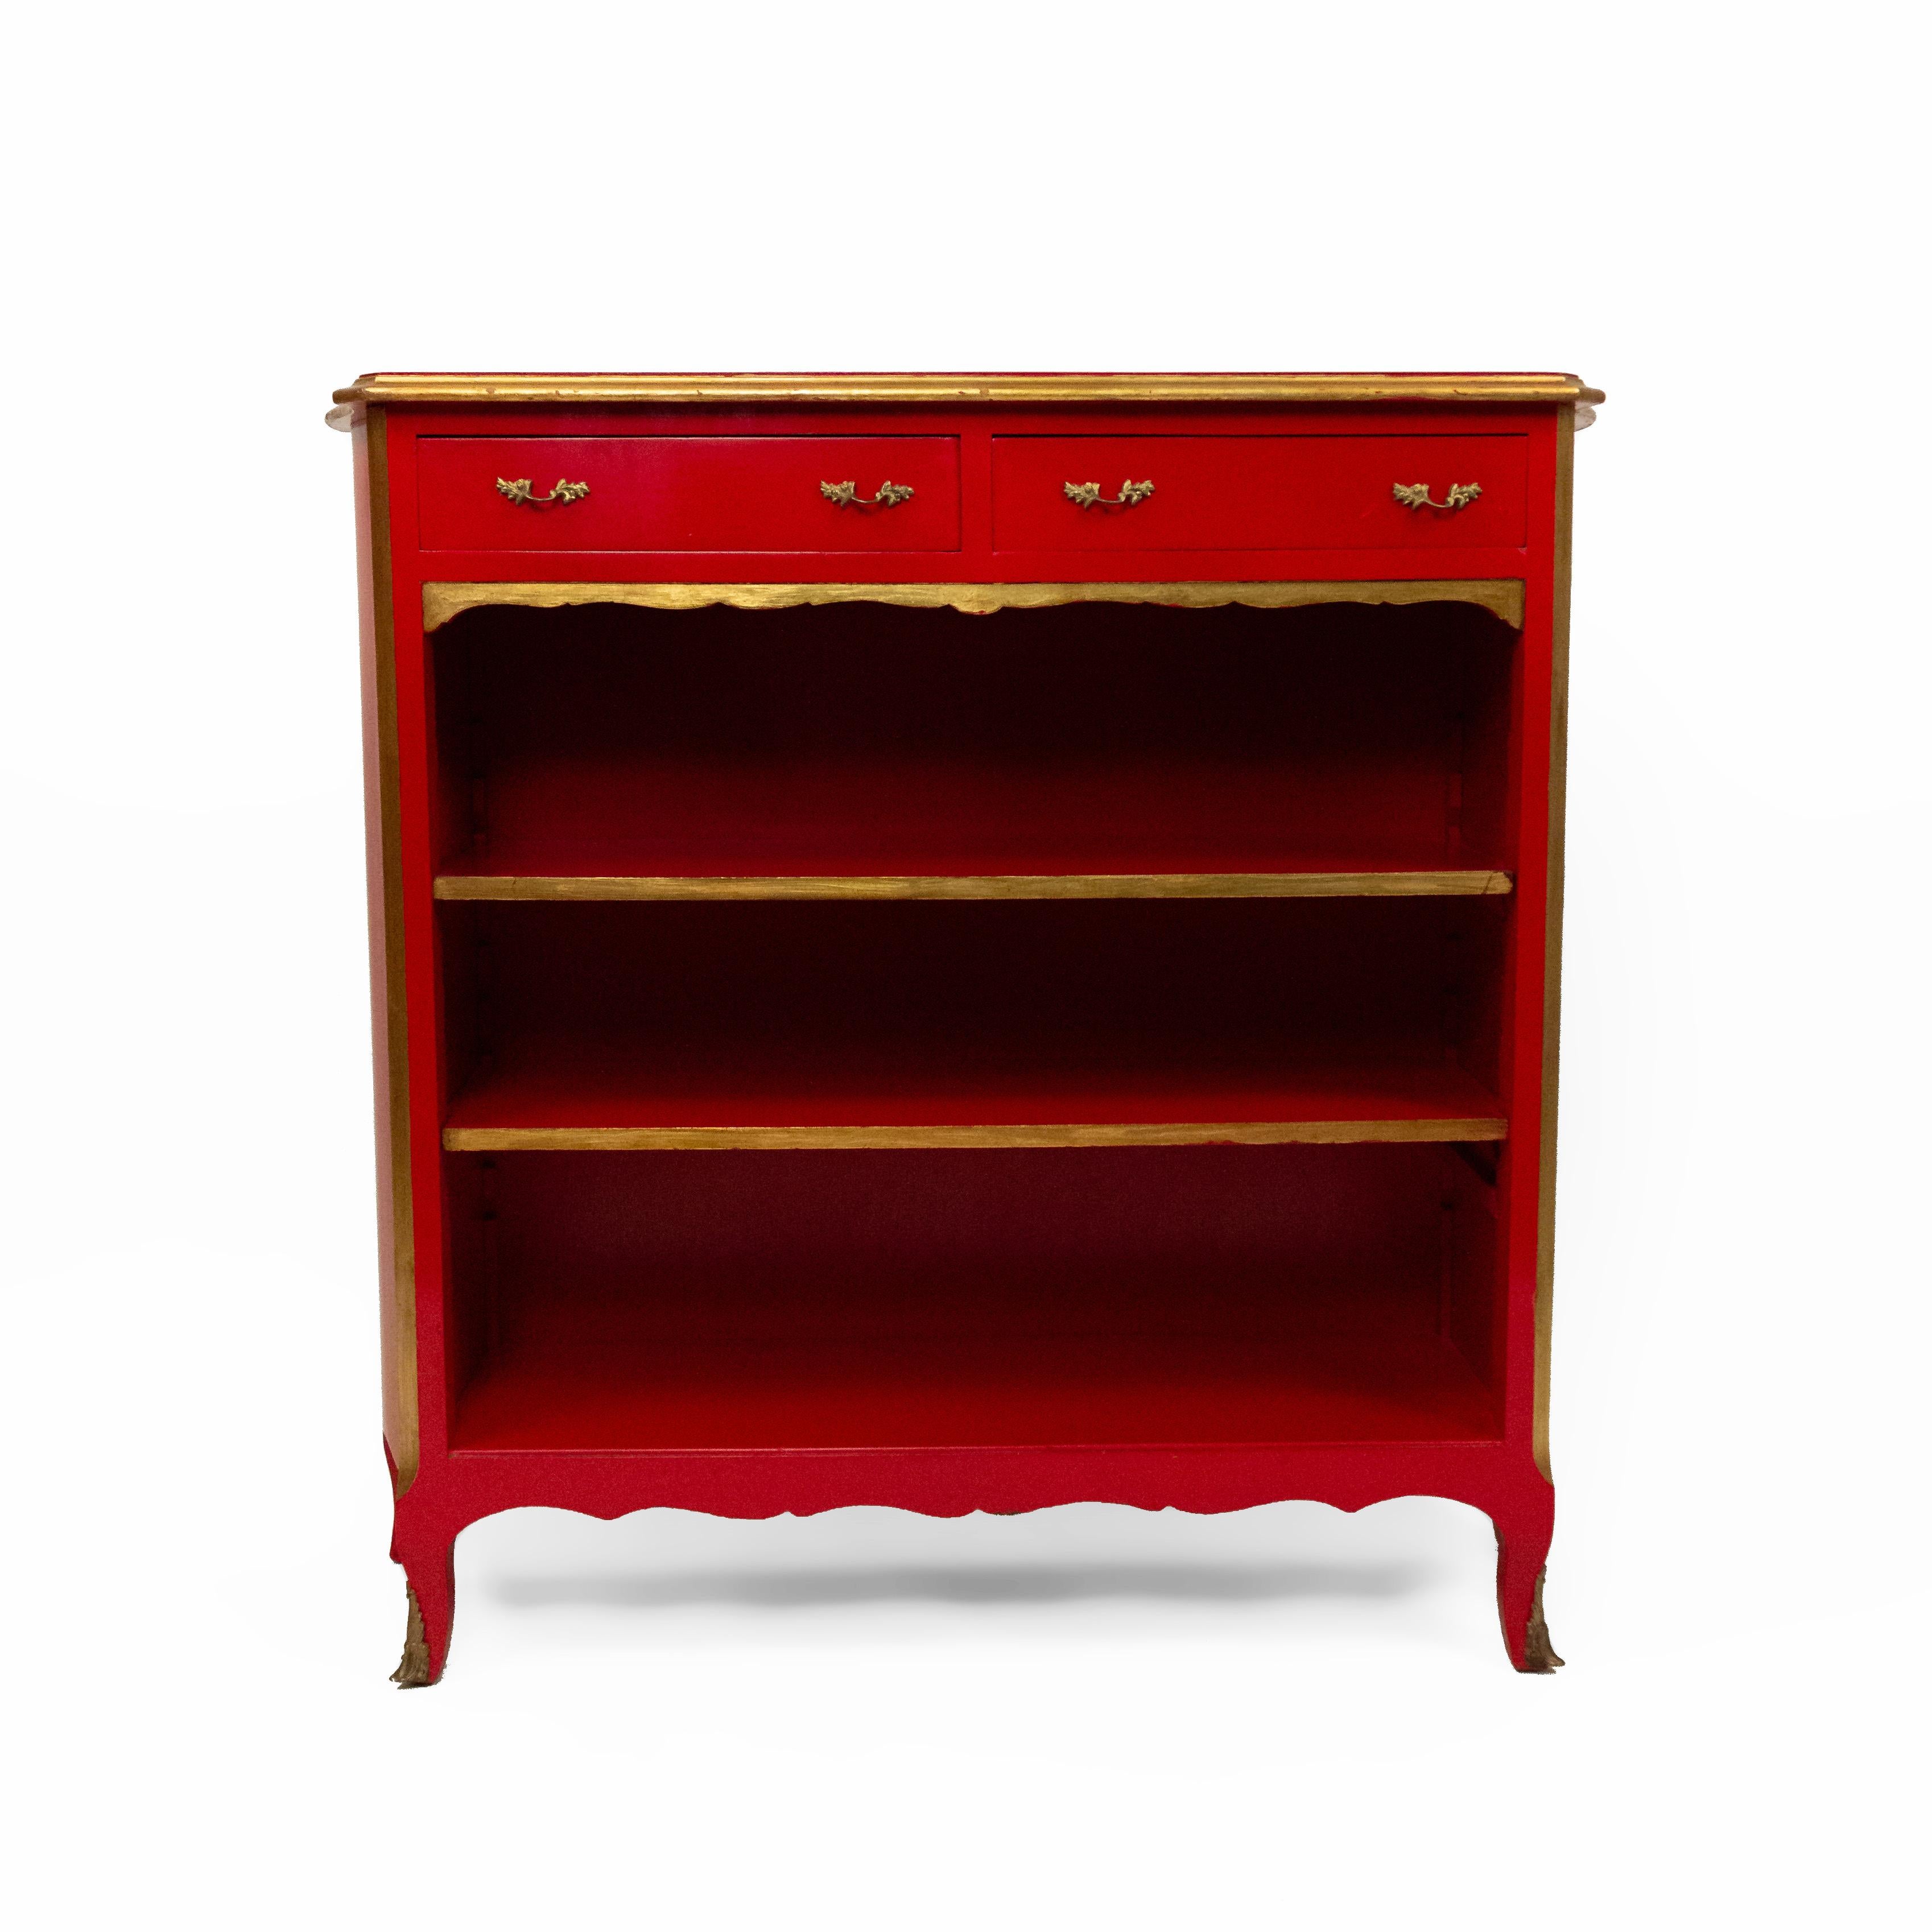 French Louis XV-style (1940s) red lacquered and gilt trimmed bookcase with 2 drawers above 3 shelves with a shaped top and bronze sabot feet. (Stamped: JANSEN)
